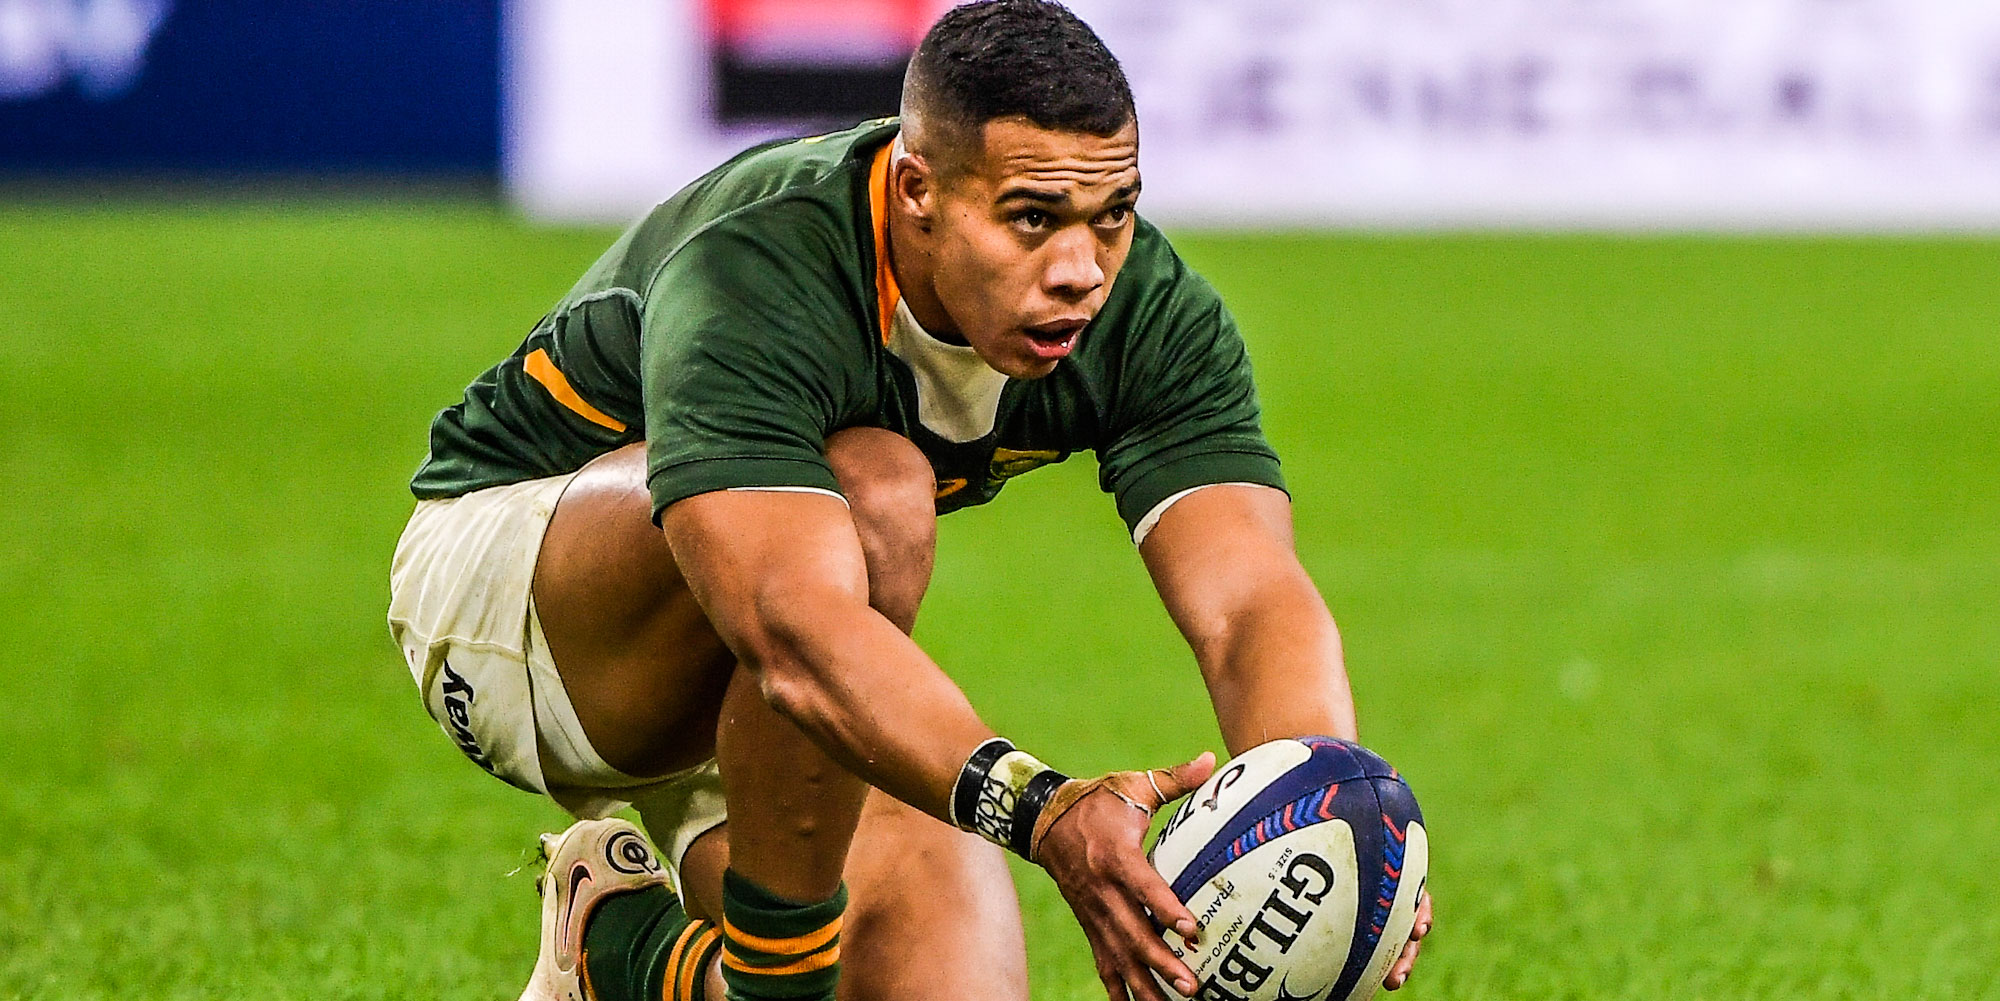 Cheslin Kolbe lines up one of his three successful shots on goal.